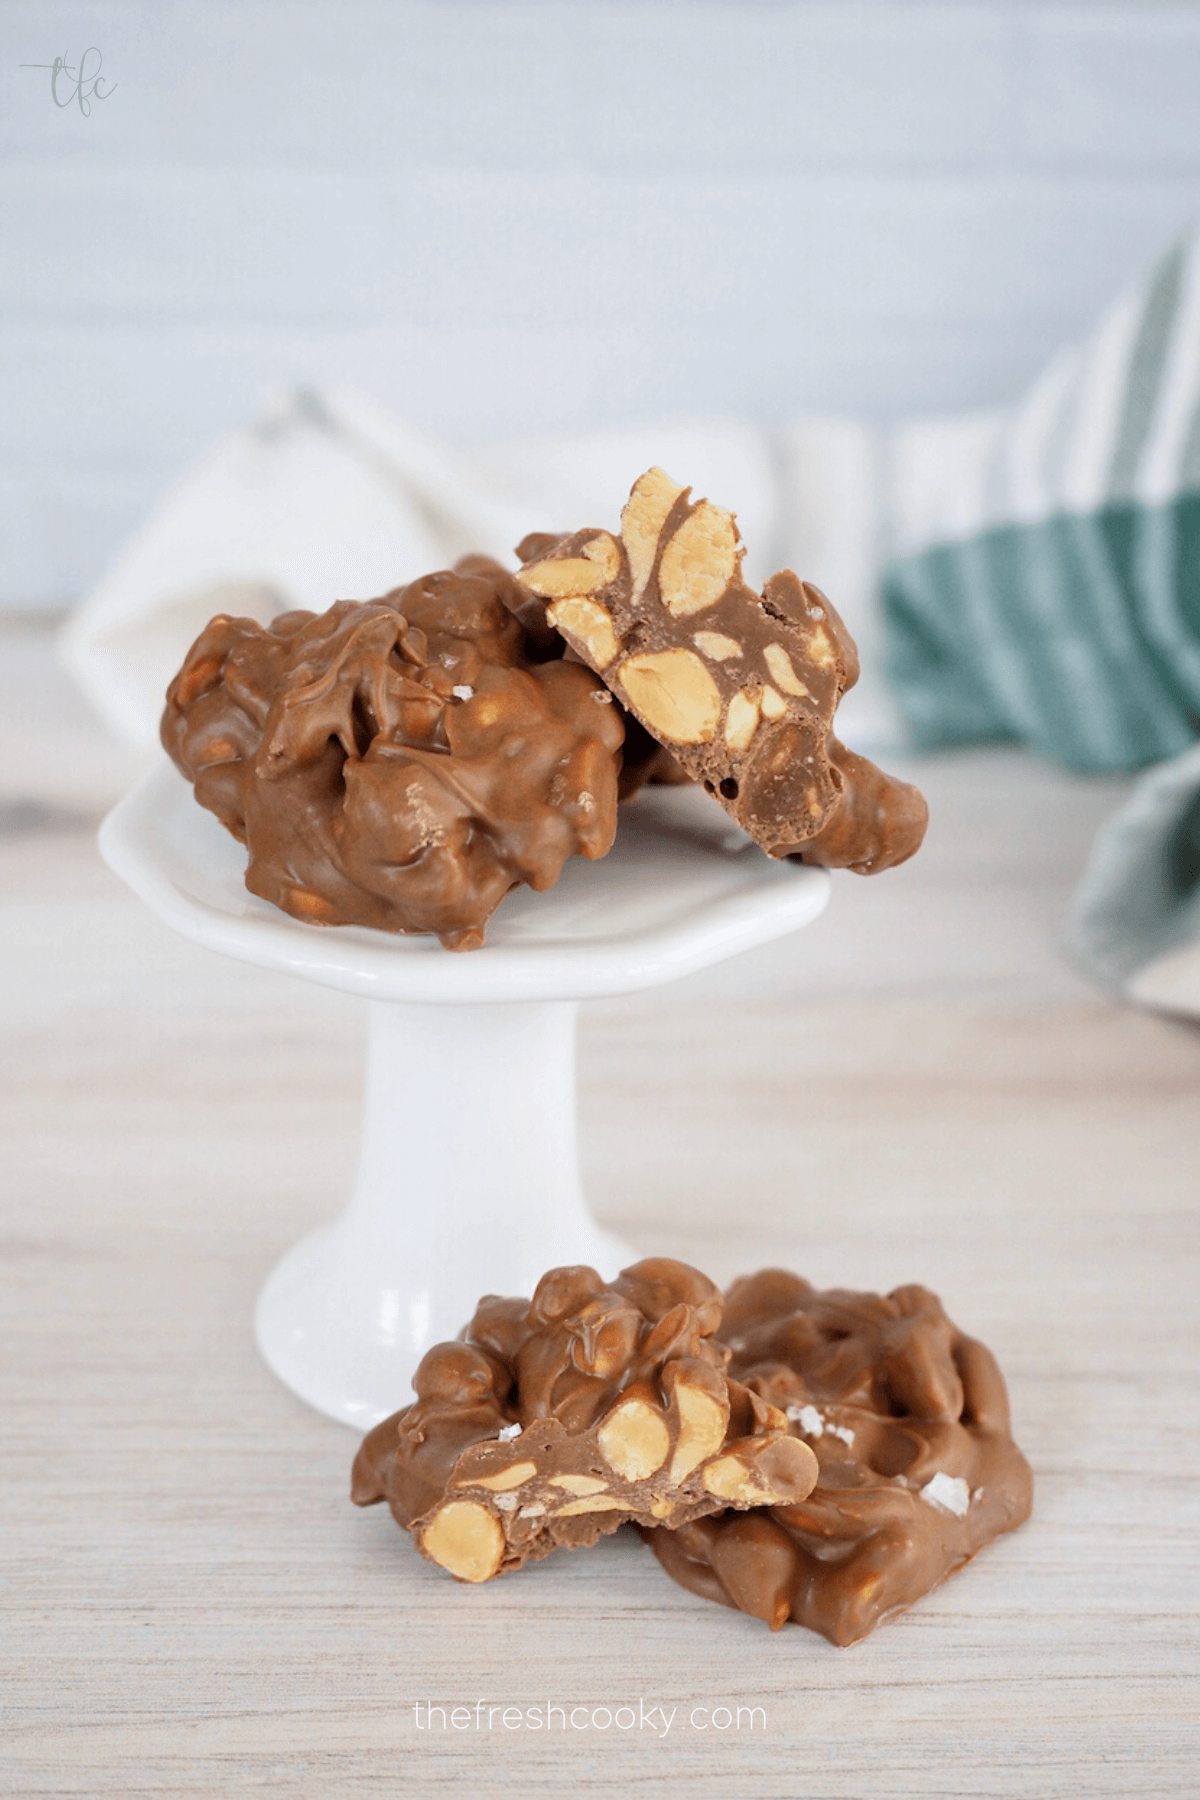 Best crockpot peanut clusters on pedestal with cluster cut in half.